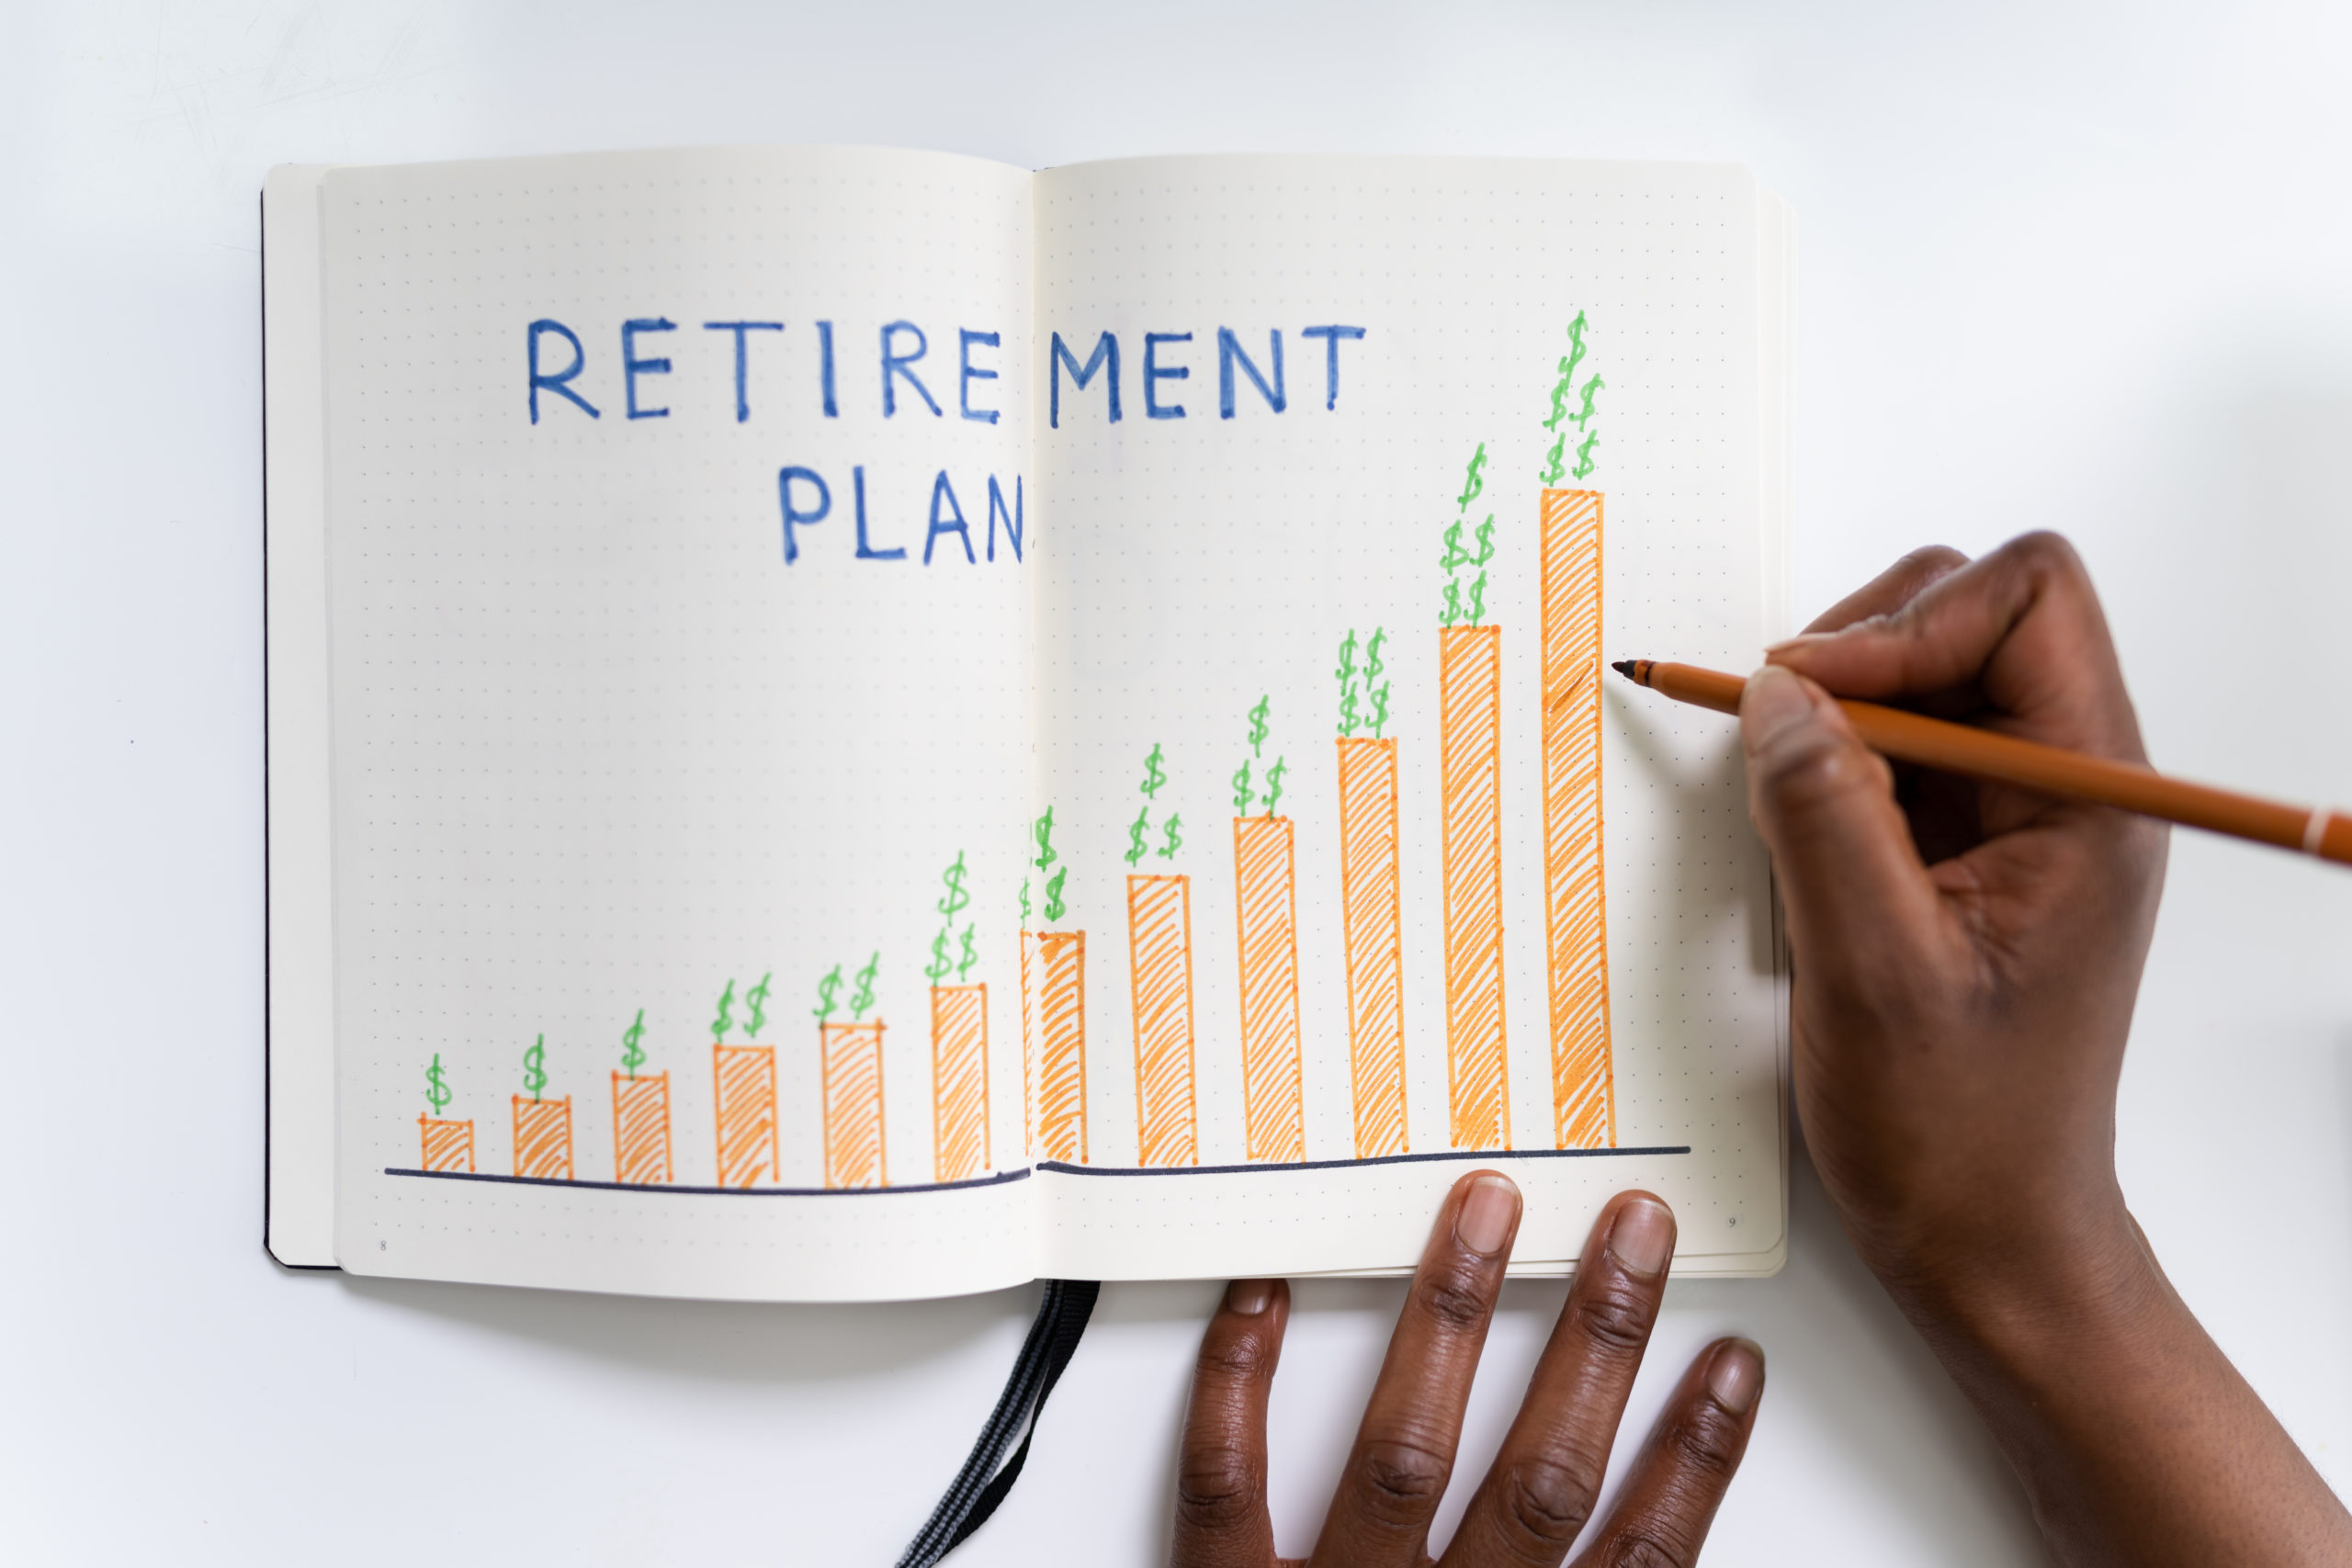 Around 85% of more than 200 small business owners in New York feel that workplace retirement savings plans are too expensive to pay on their own, according to an AARP NY survey. (Adobe Stock)